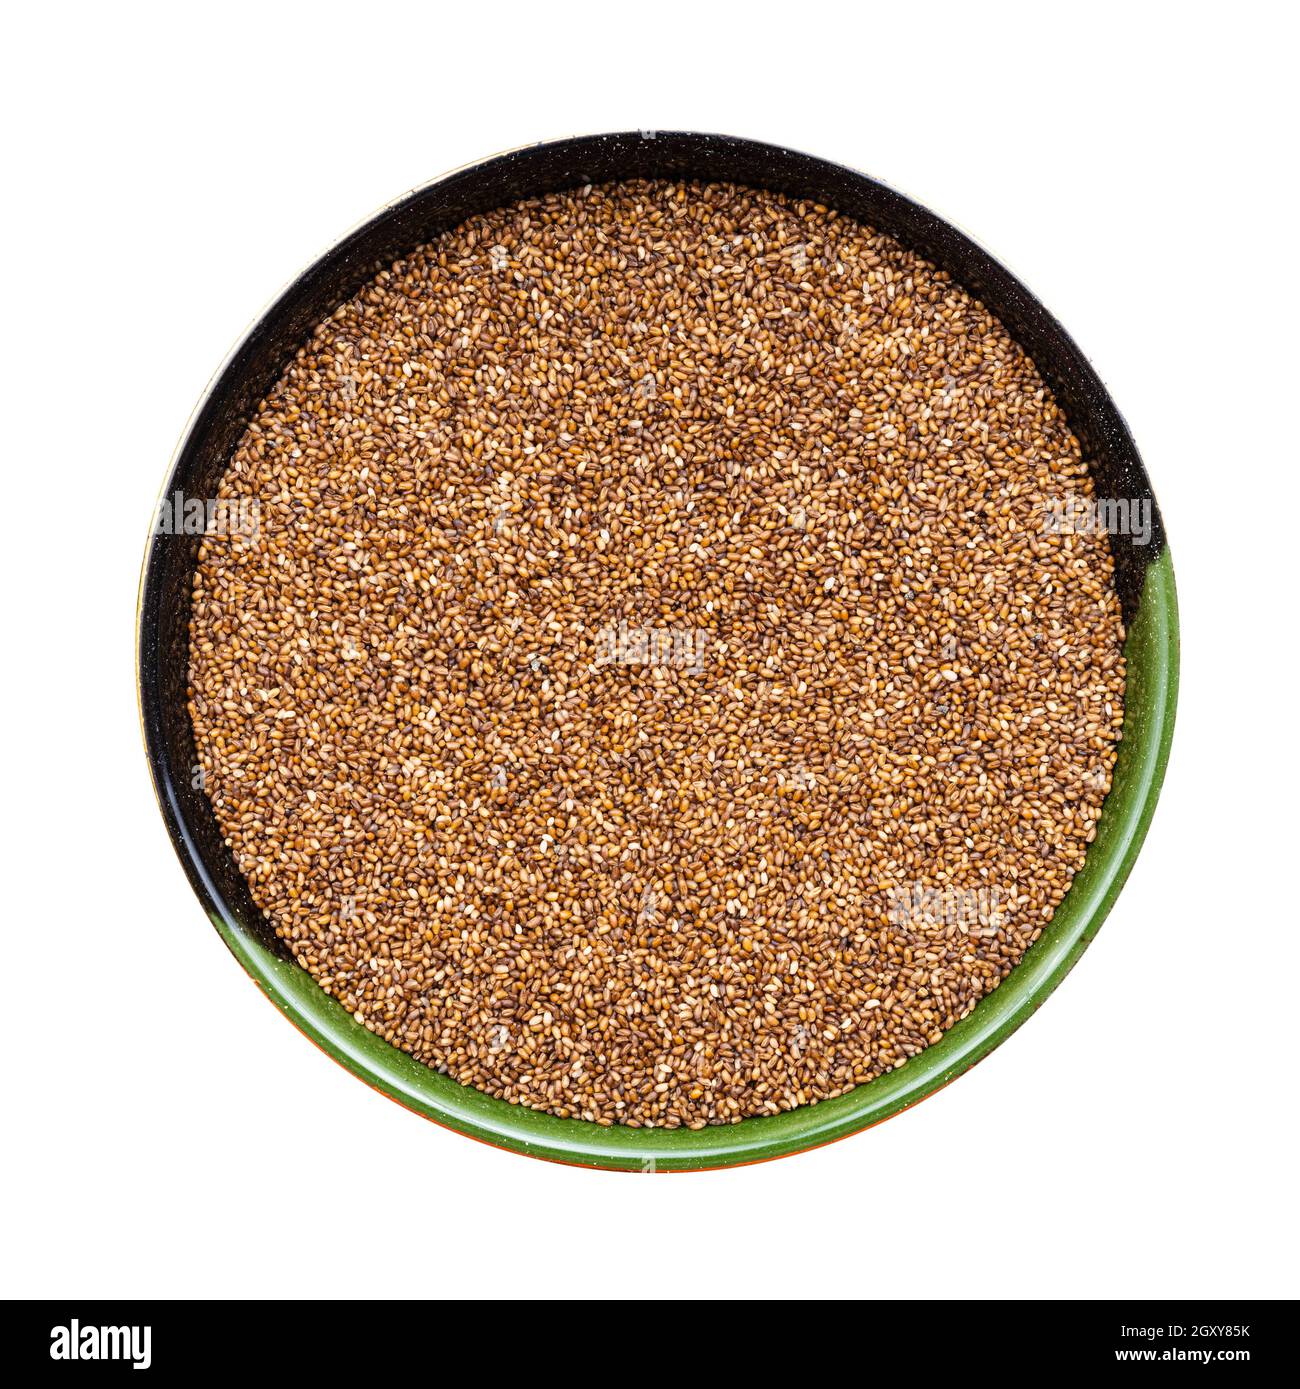 top view of whole-grain teff seeds in round bowl isolated on white background Stock Photo